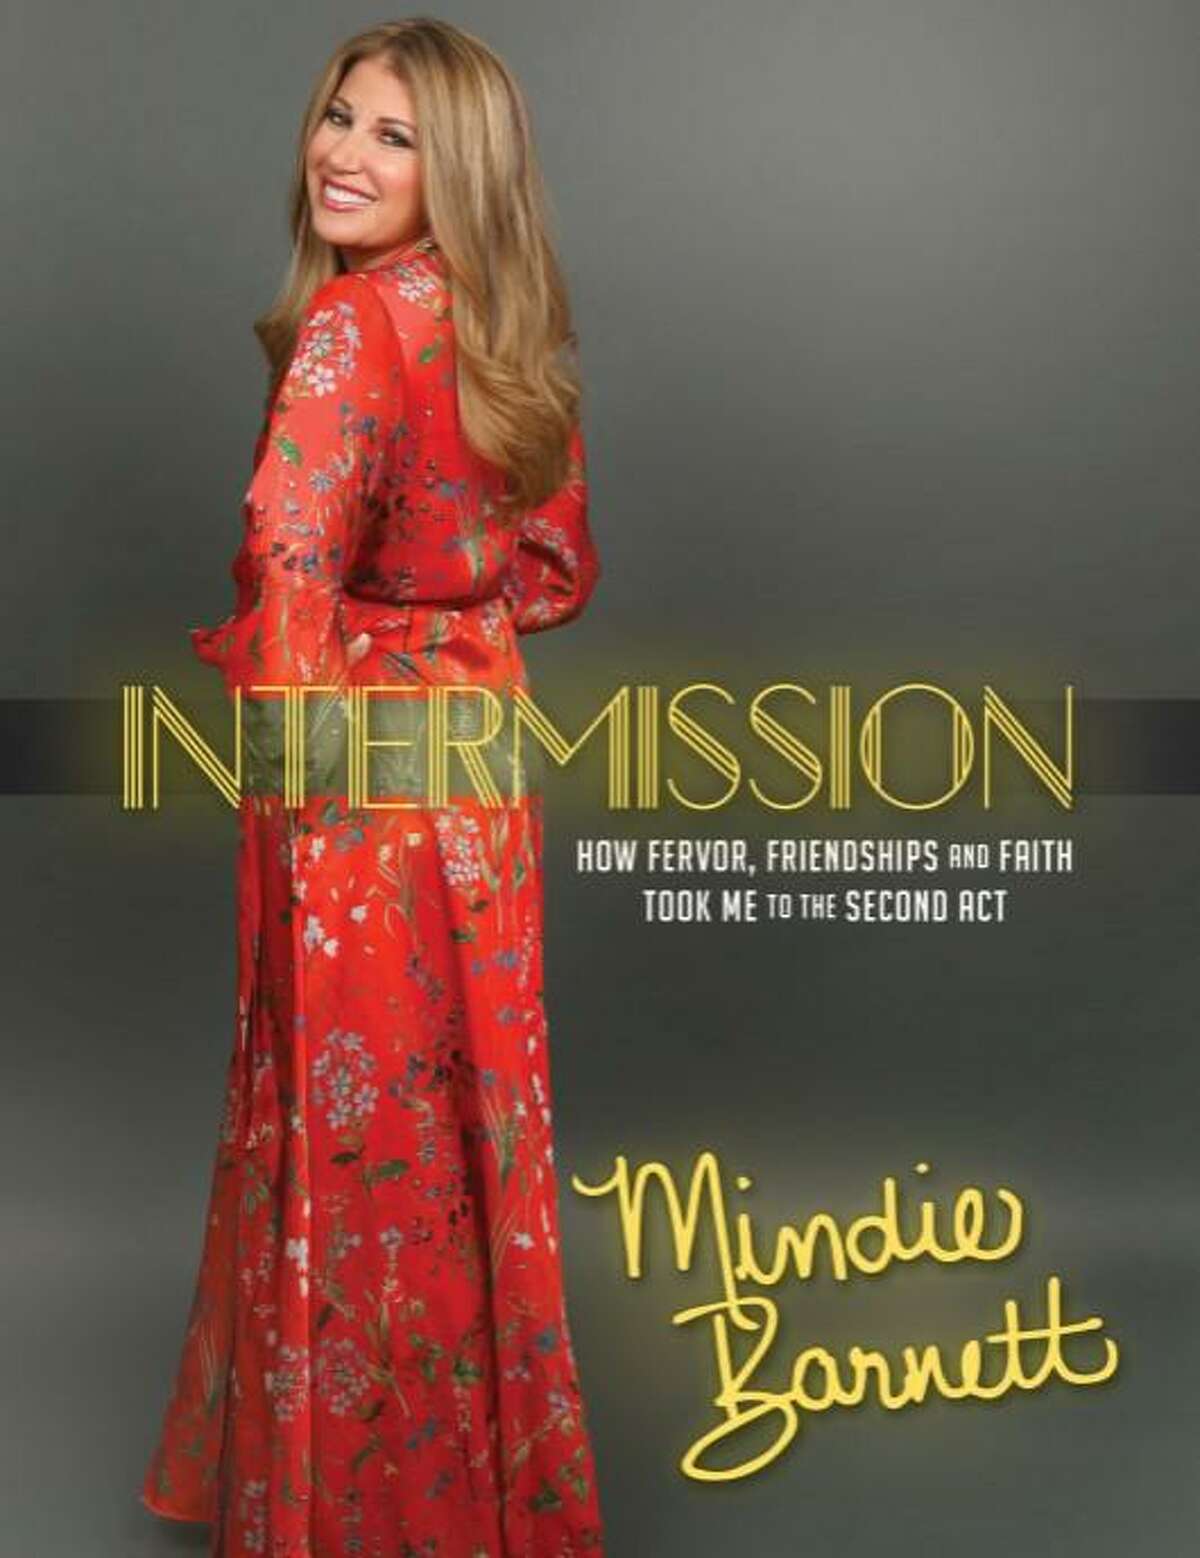 Author and parenting expert Mindie Barnett will share her self-help memoir “Intermission: How Fervor, Friendships and Faith Took Me to The Second Act” Aug. 25 at the Wesleyan RJ Julia Bookstore on Main Street in Middletown.